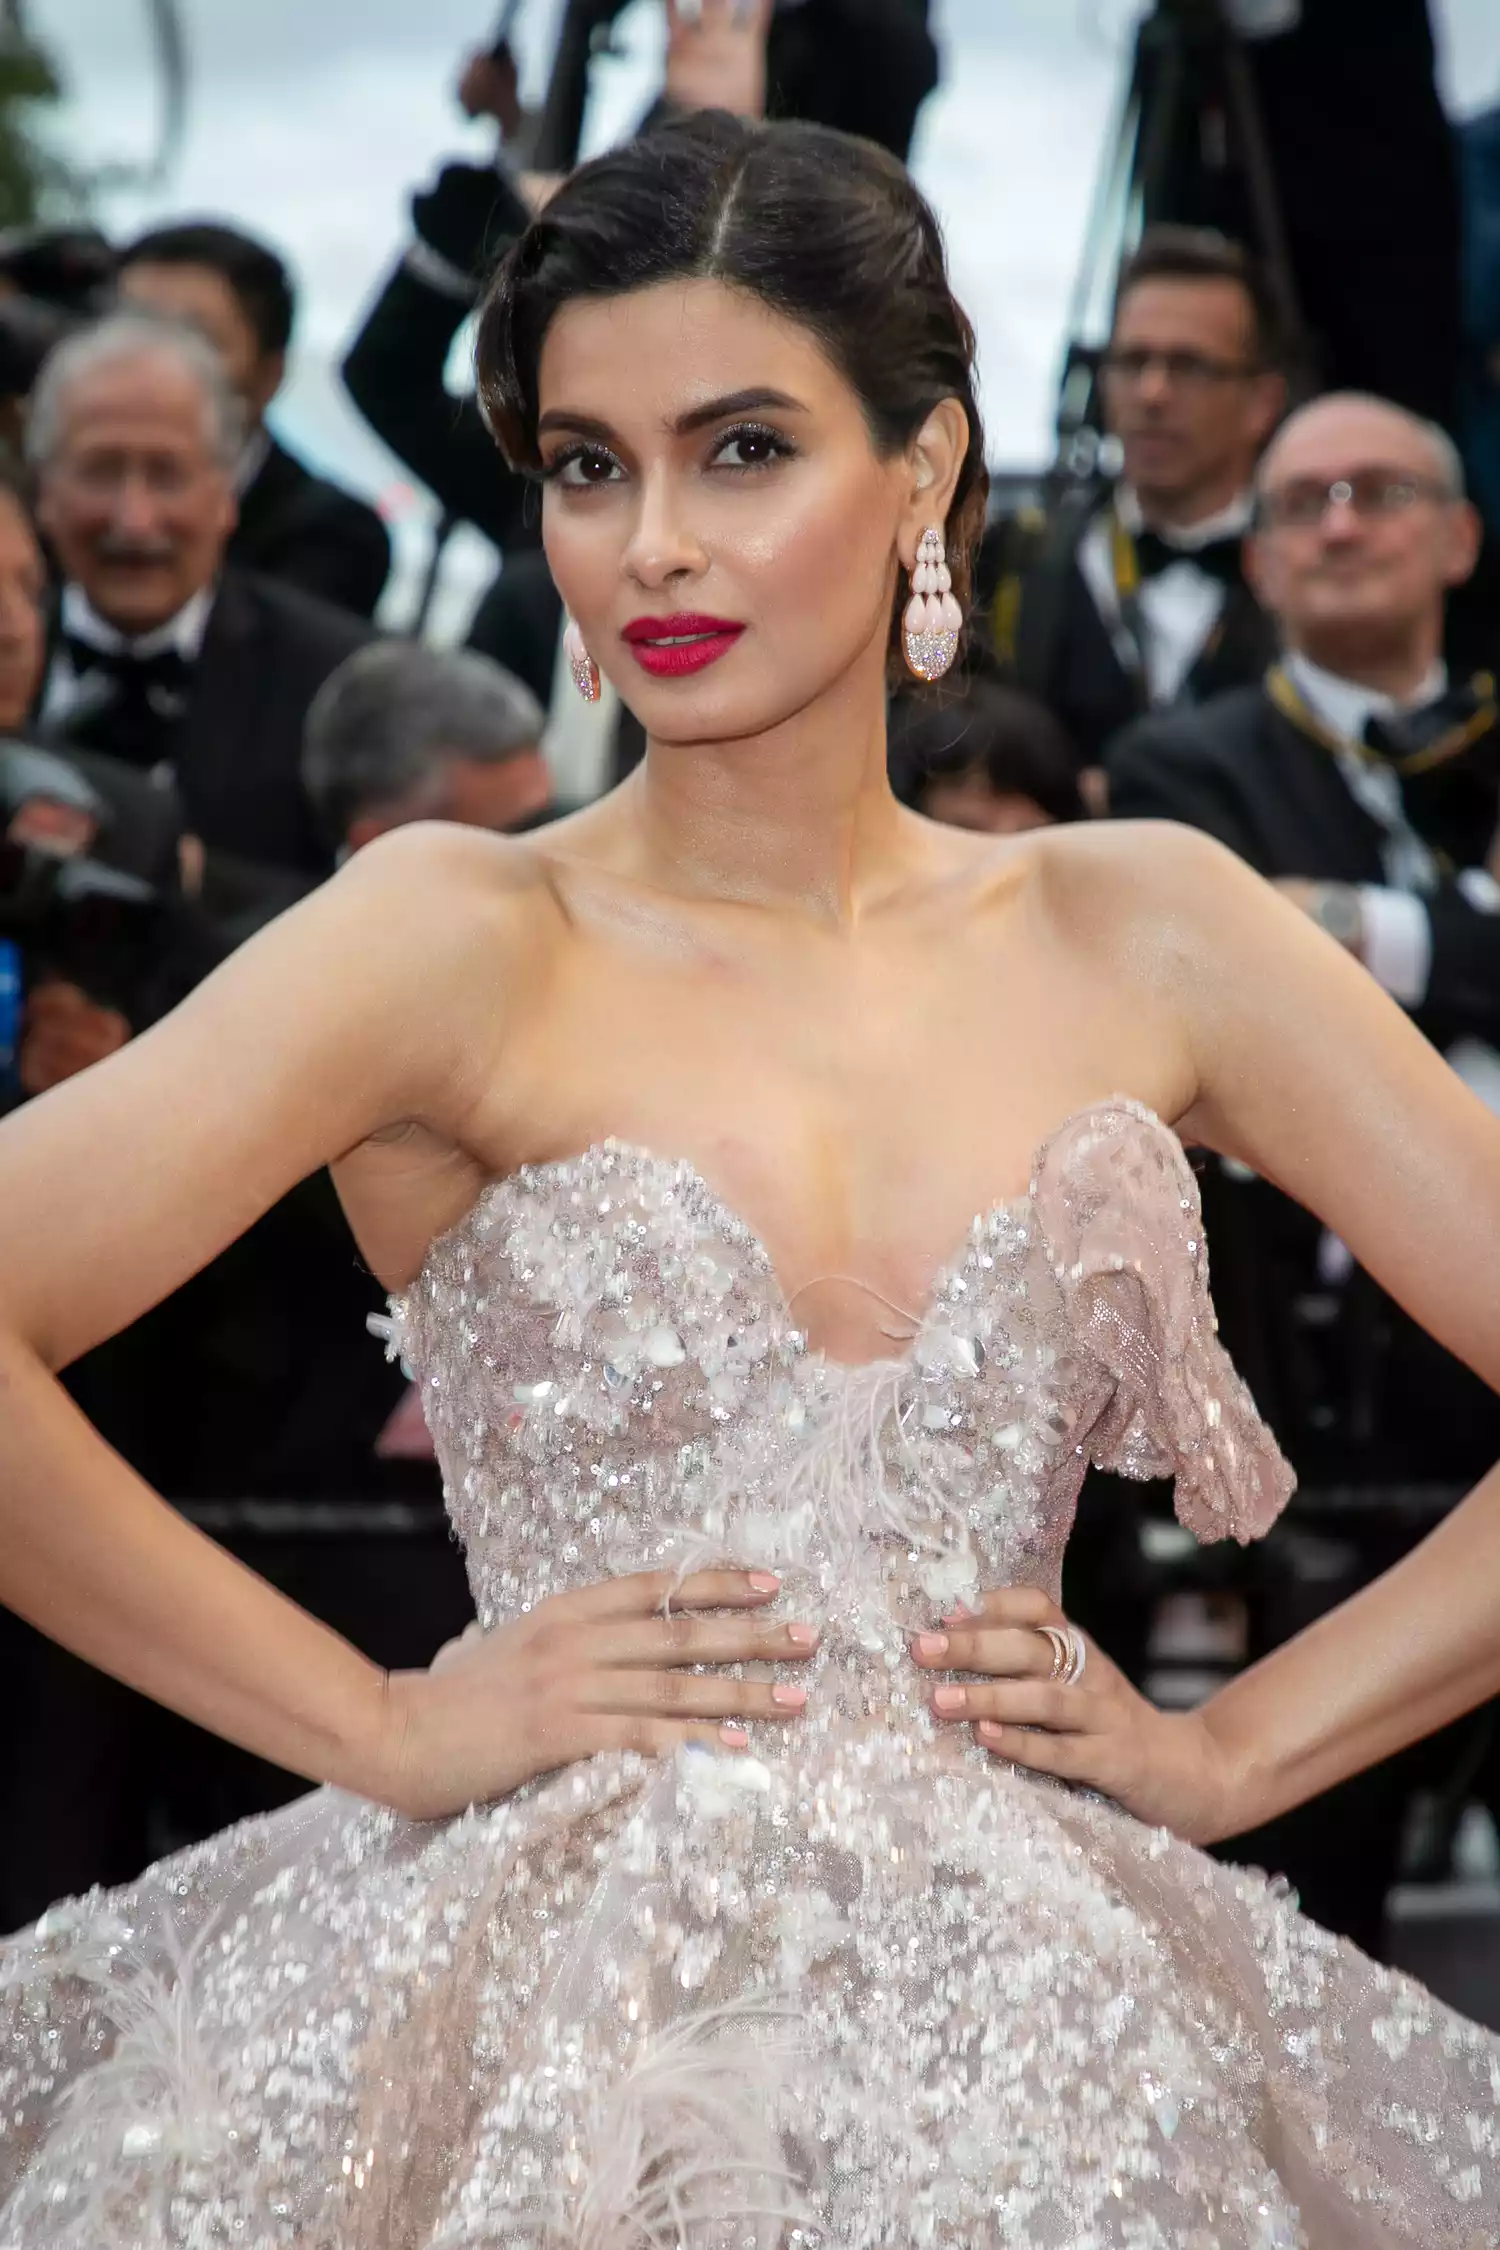 Diana Penty wearing a gown on the red carpet at the 72nd annual cannes film festival